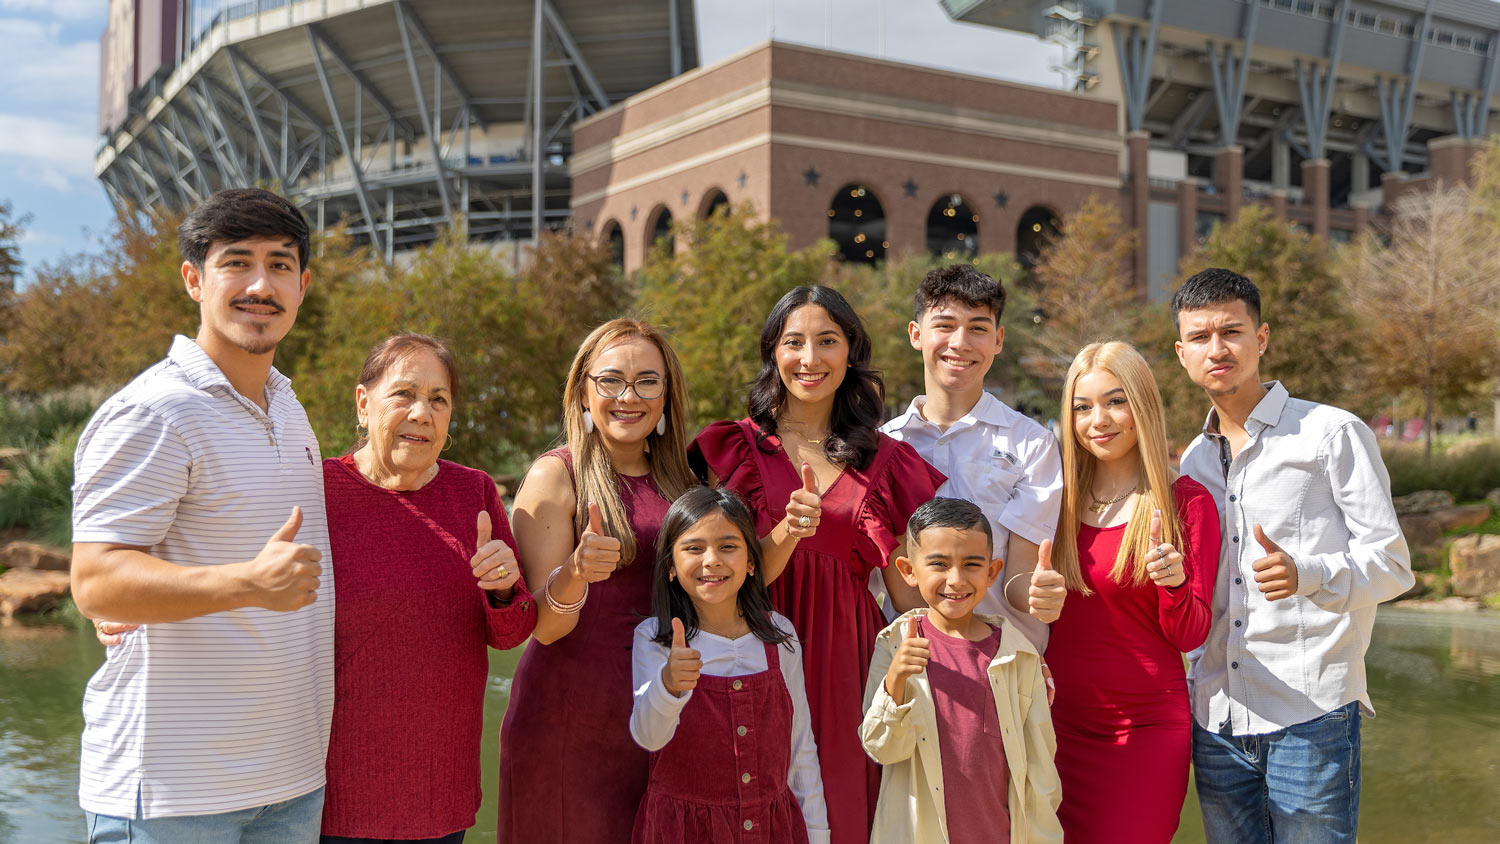 An Aggie on their Ring Day poses with their family in front of Kyle Field